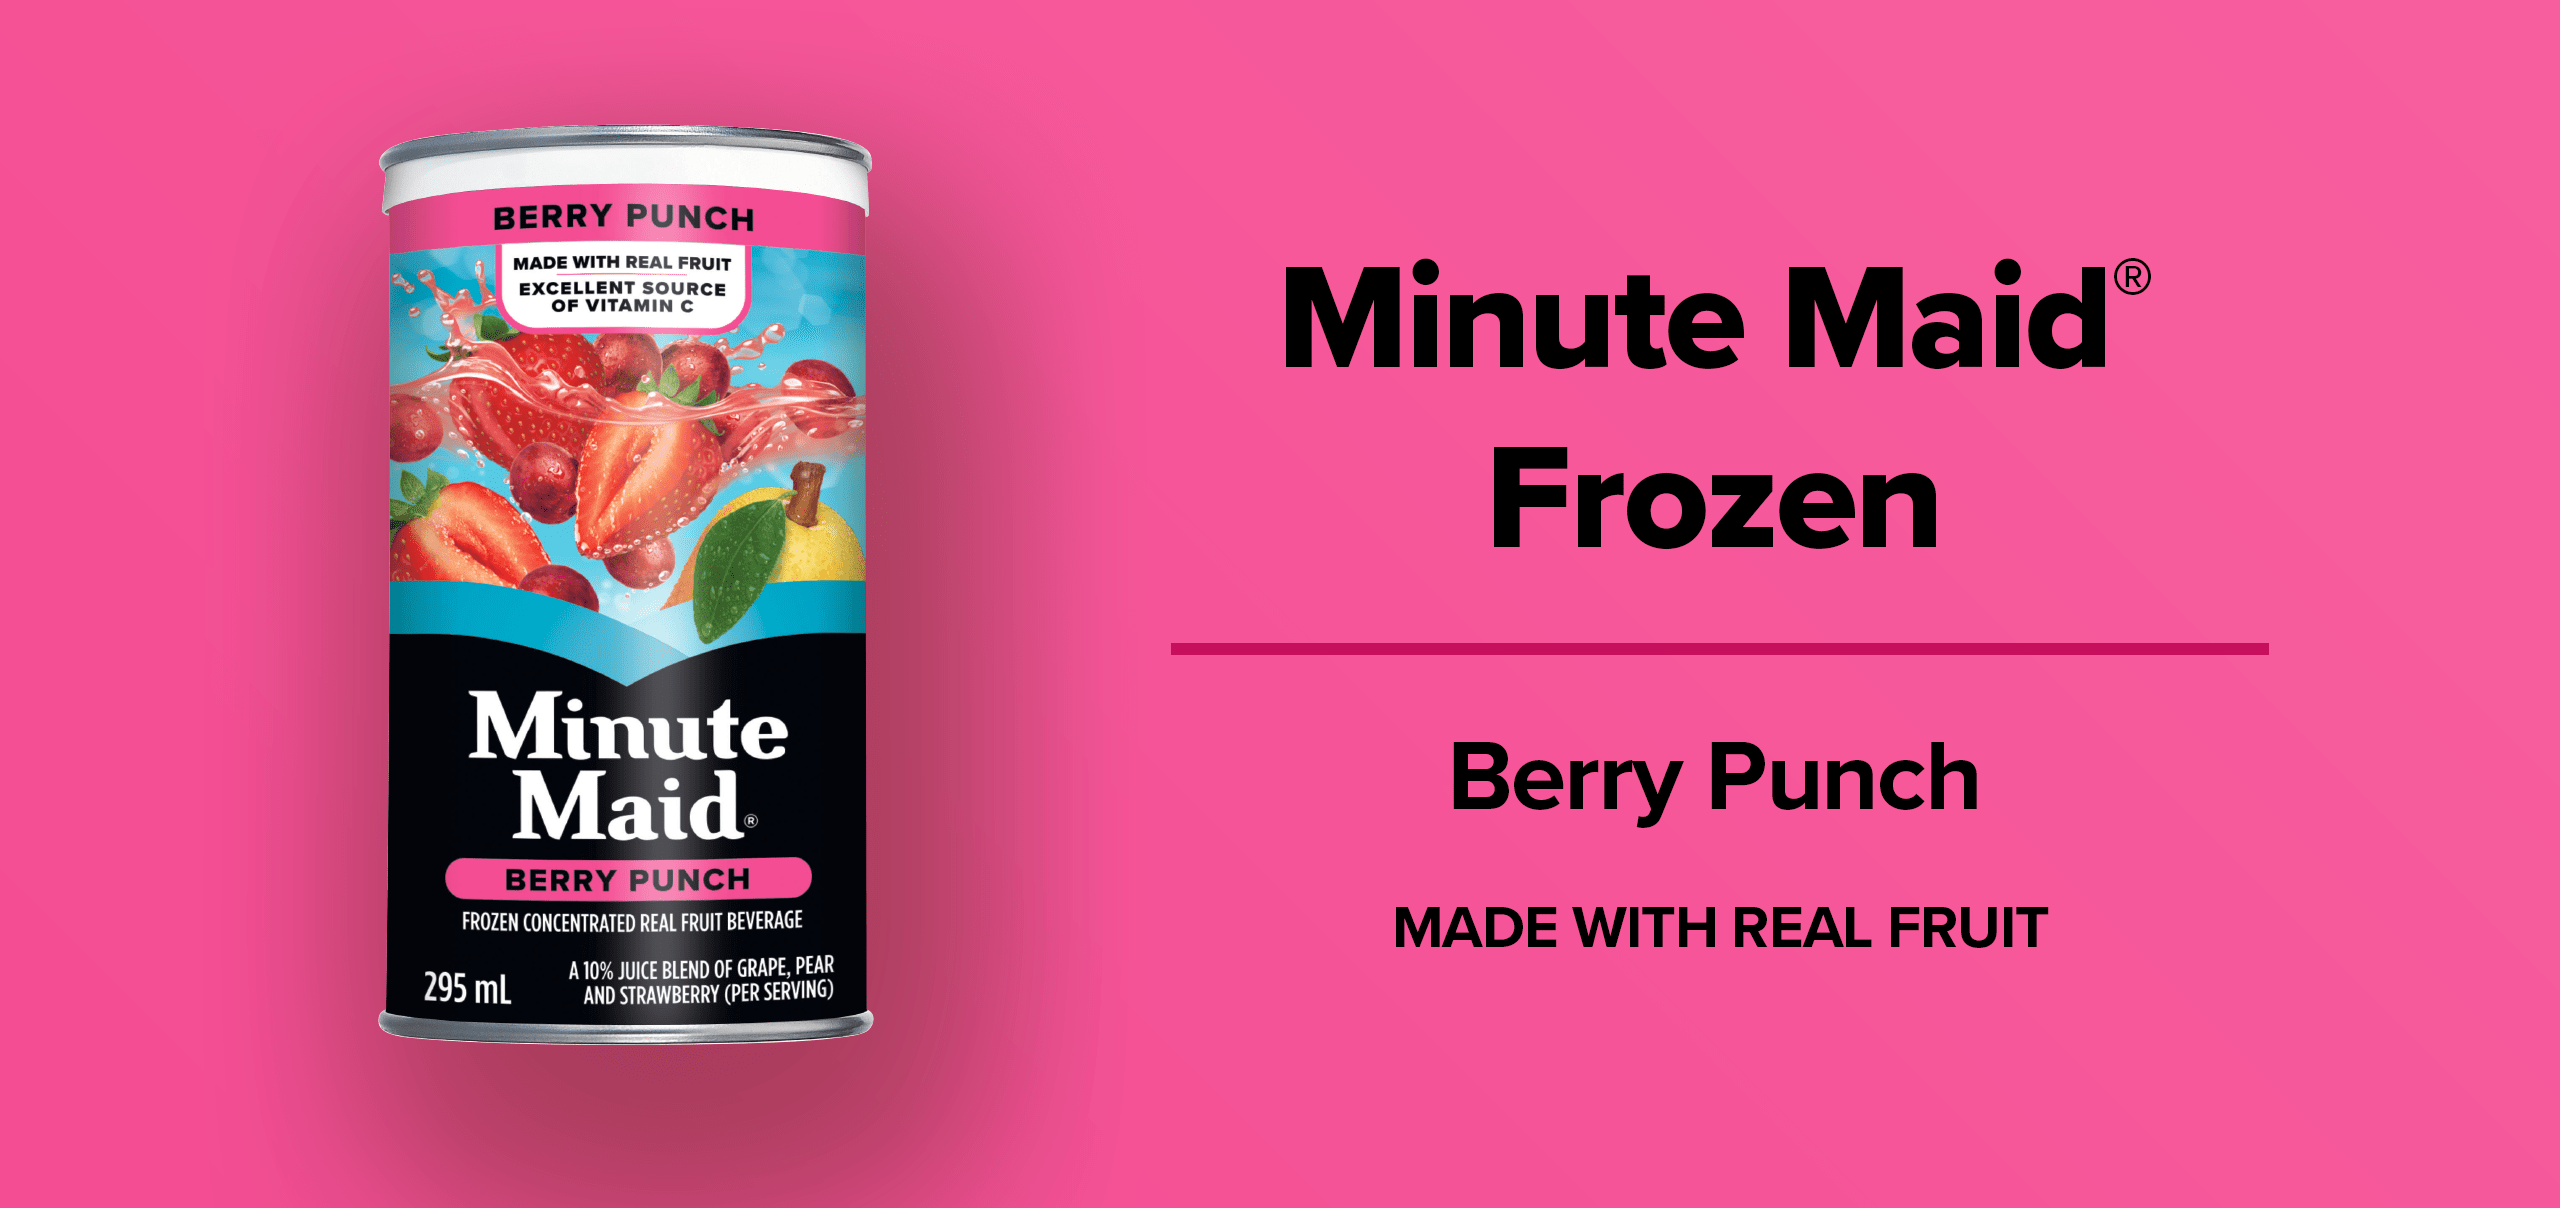 Minute Maid Frozen. Berry Punch. Made with real fruit.